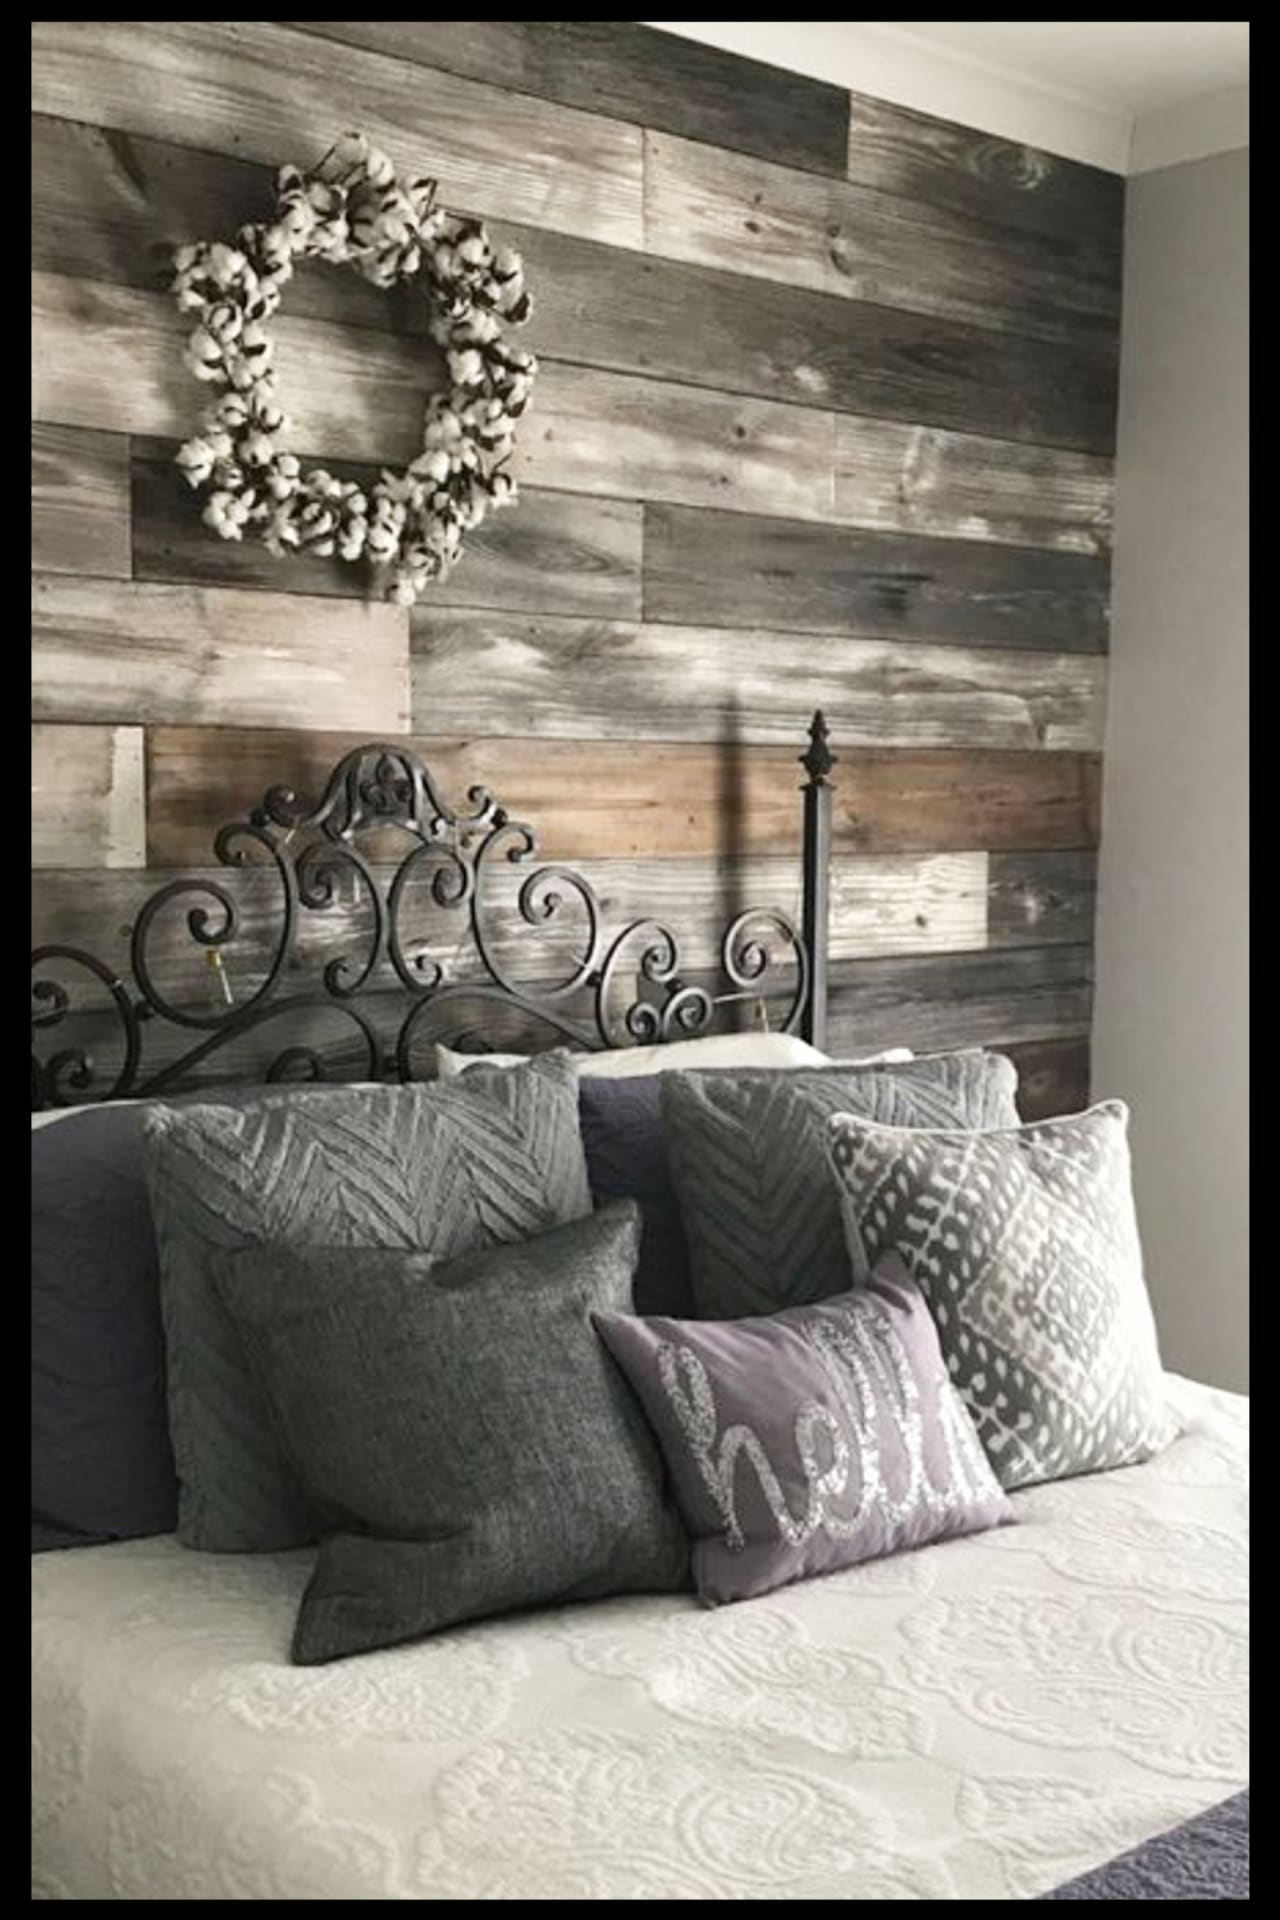 Pallet projects - easy DIY pallet wall decor - panel your walls with old pallet wood such clever home decorating pallet projects - pallet wall in bedroom behind bed